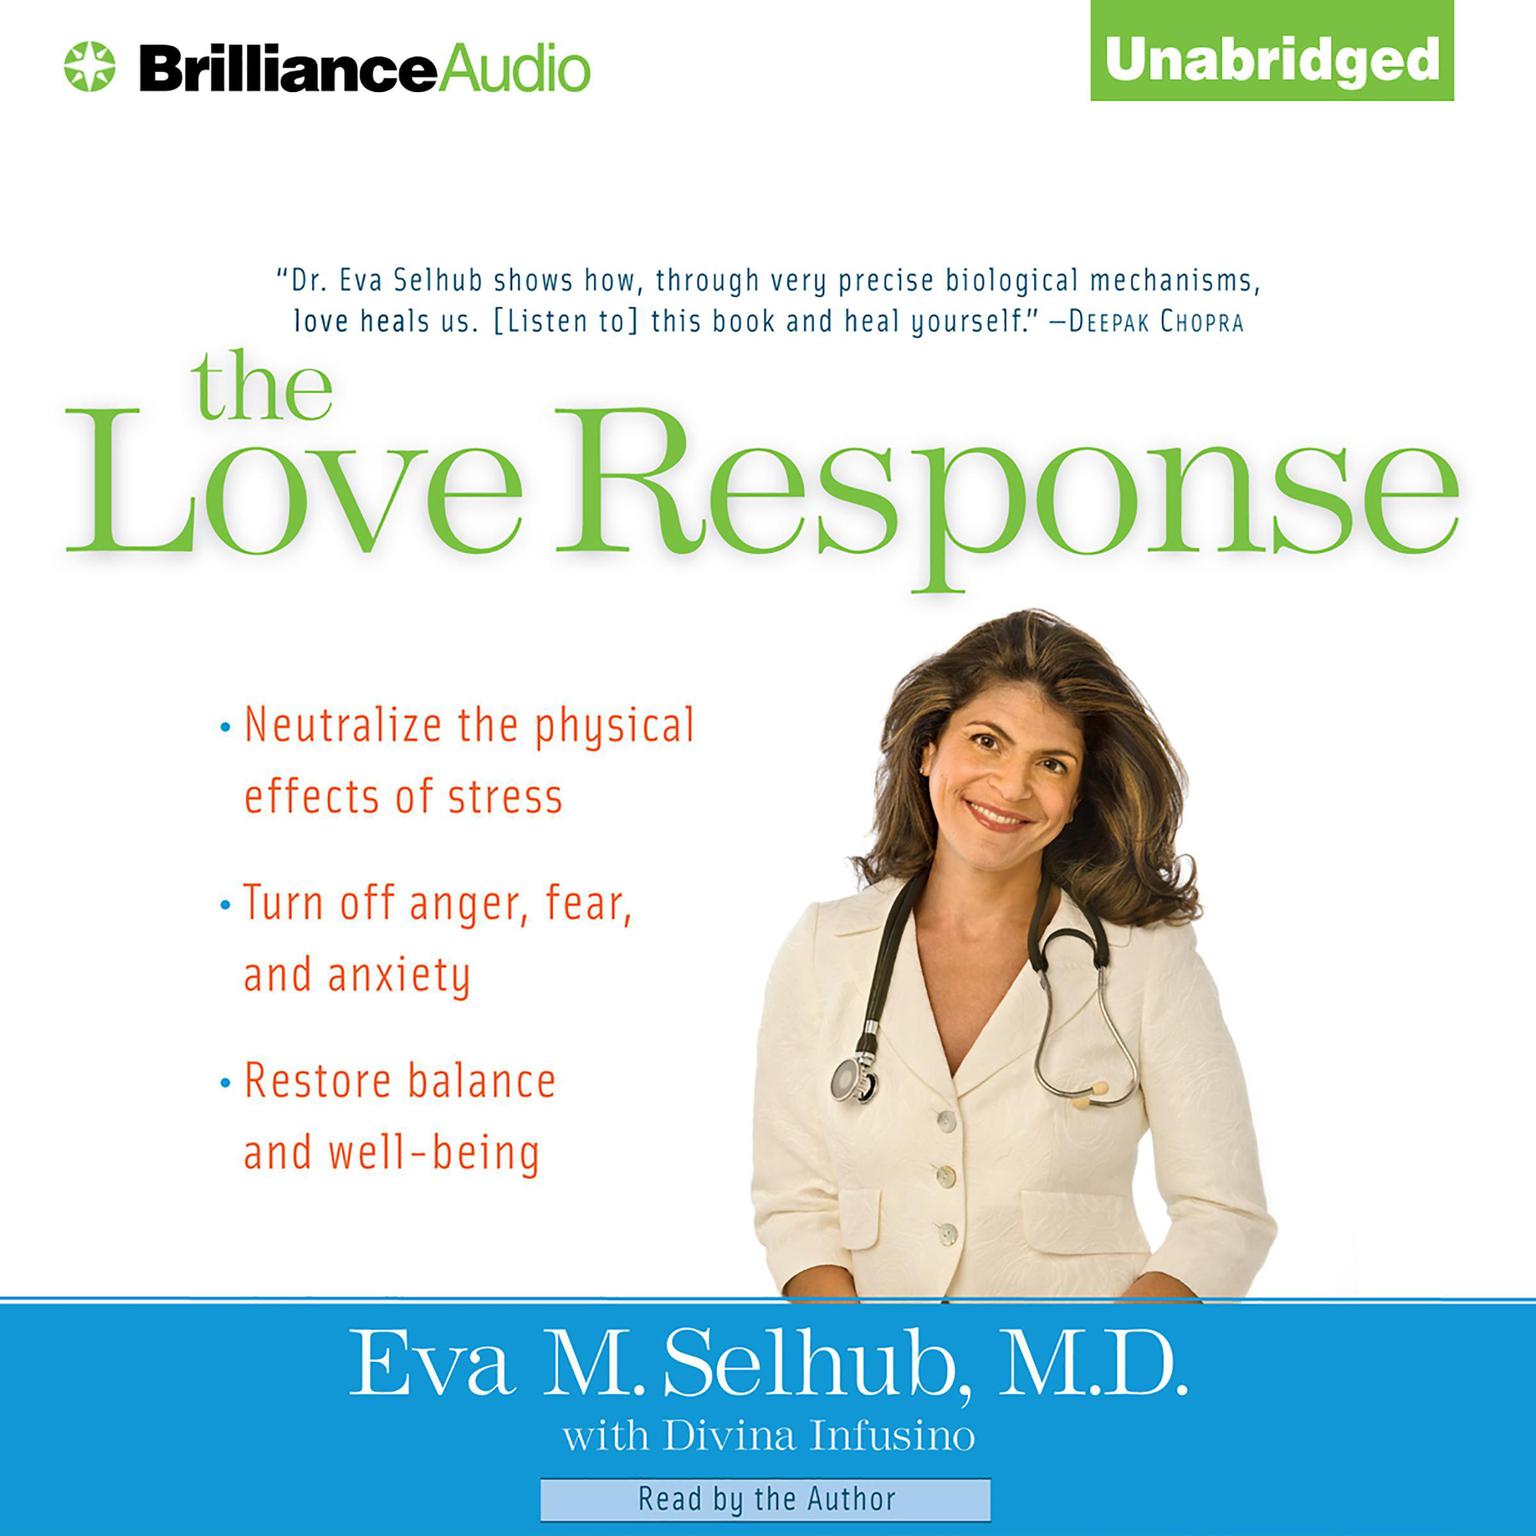 The Love Response: Your Prescription to Turn Off Fear, Anger, and Anxiety to Achieve Vibrant Health and Transform Your Life Audiobook, by Eva M. Selhub